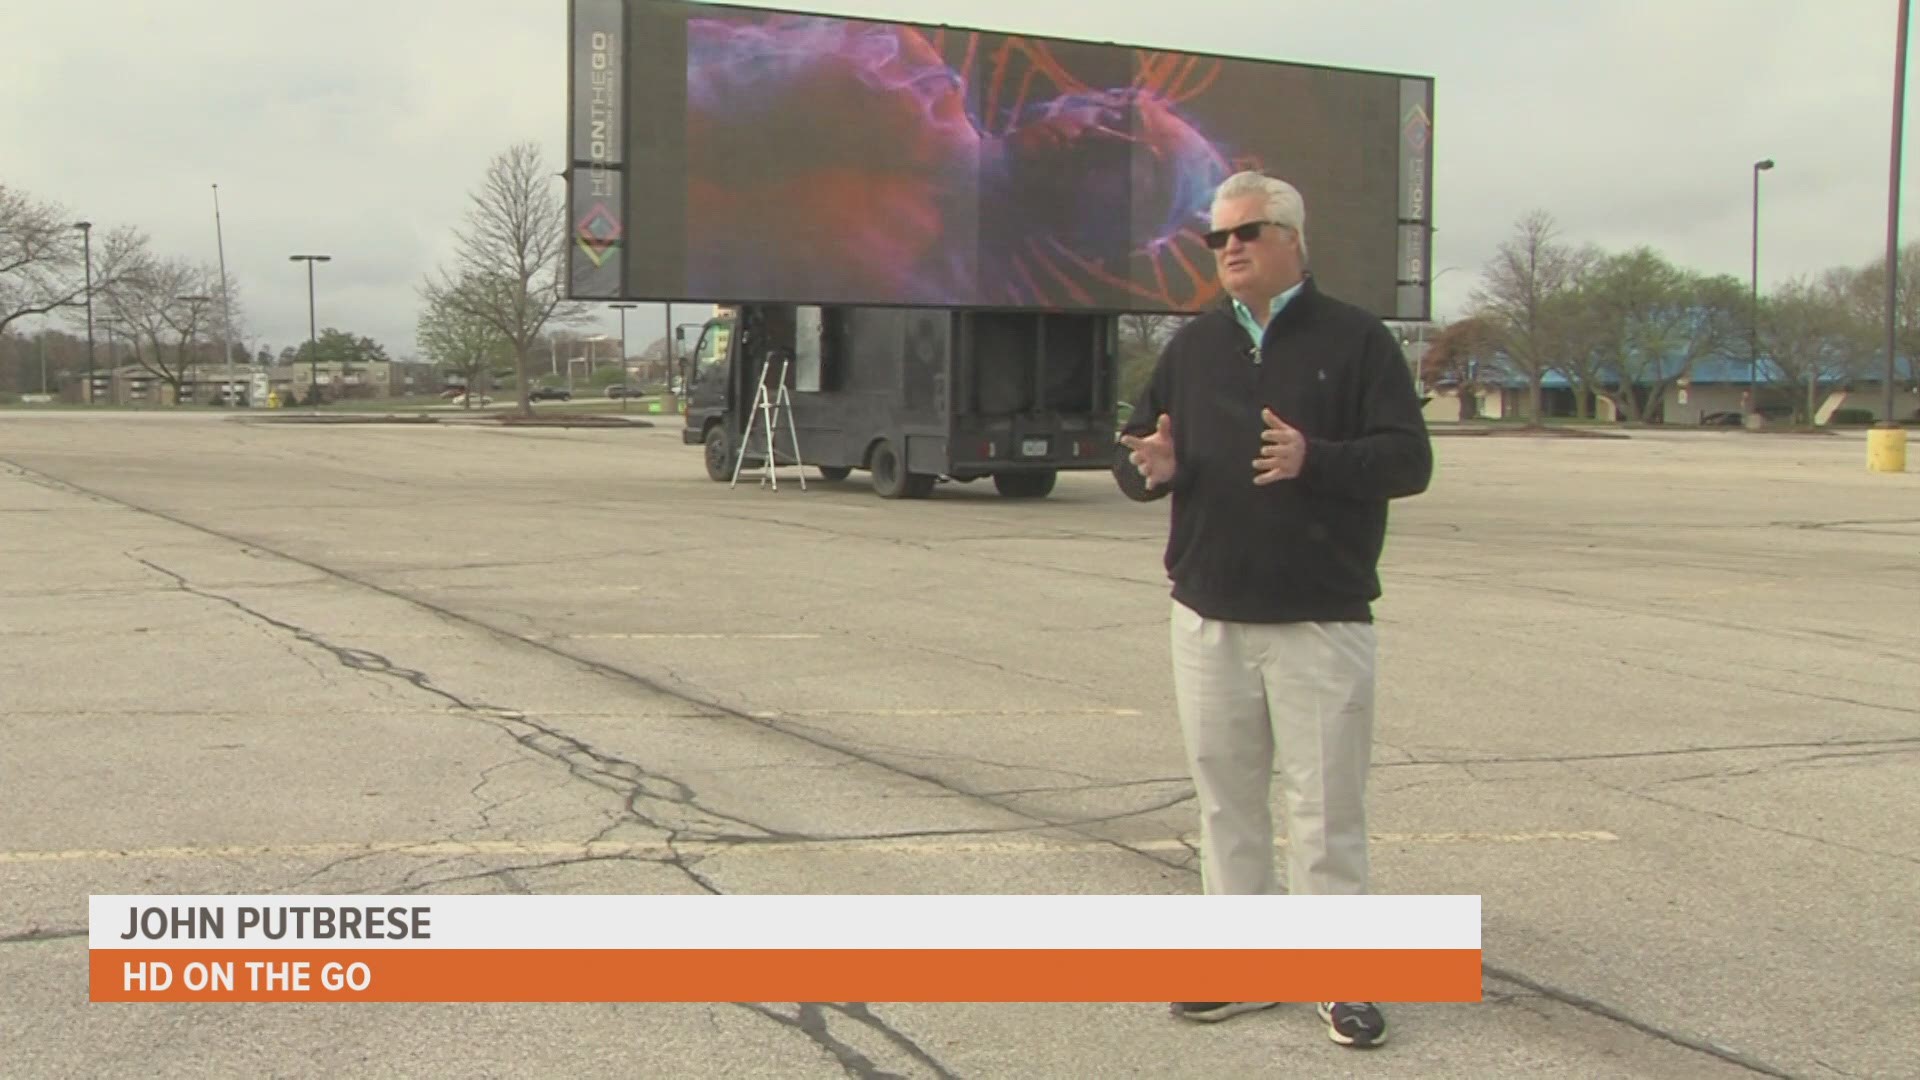 HD On the Go is excited for their new venture of creating a drive-in movie at Valley West Mall